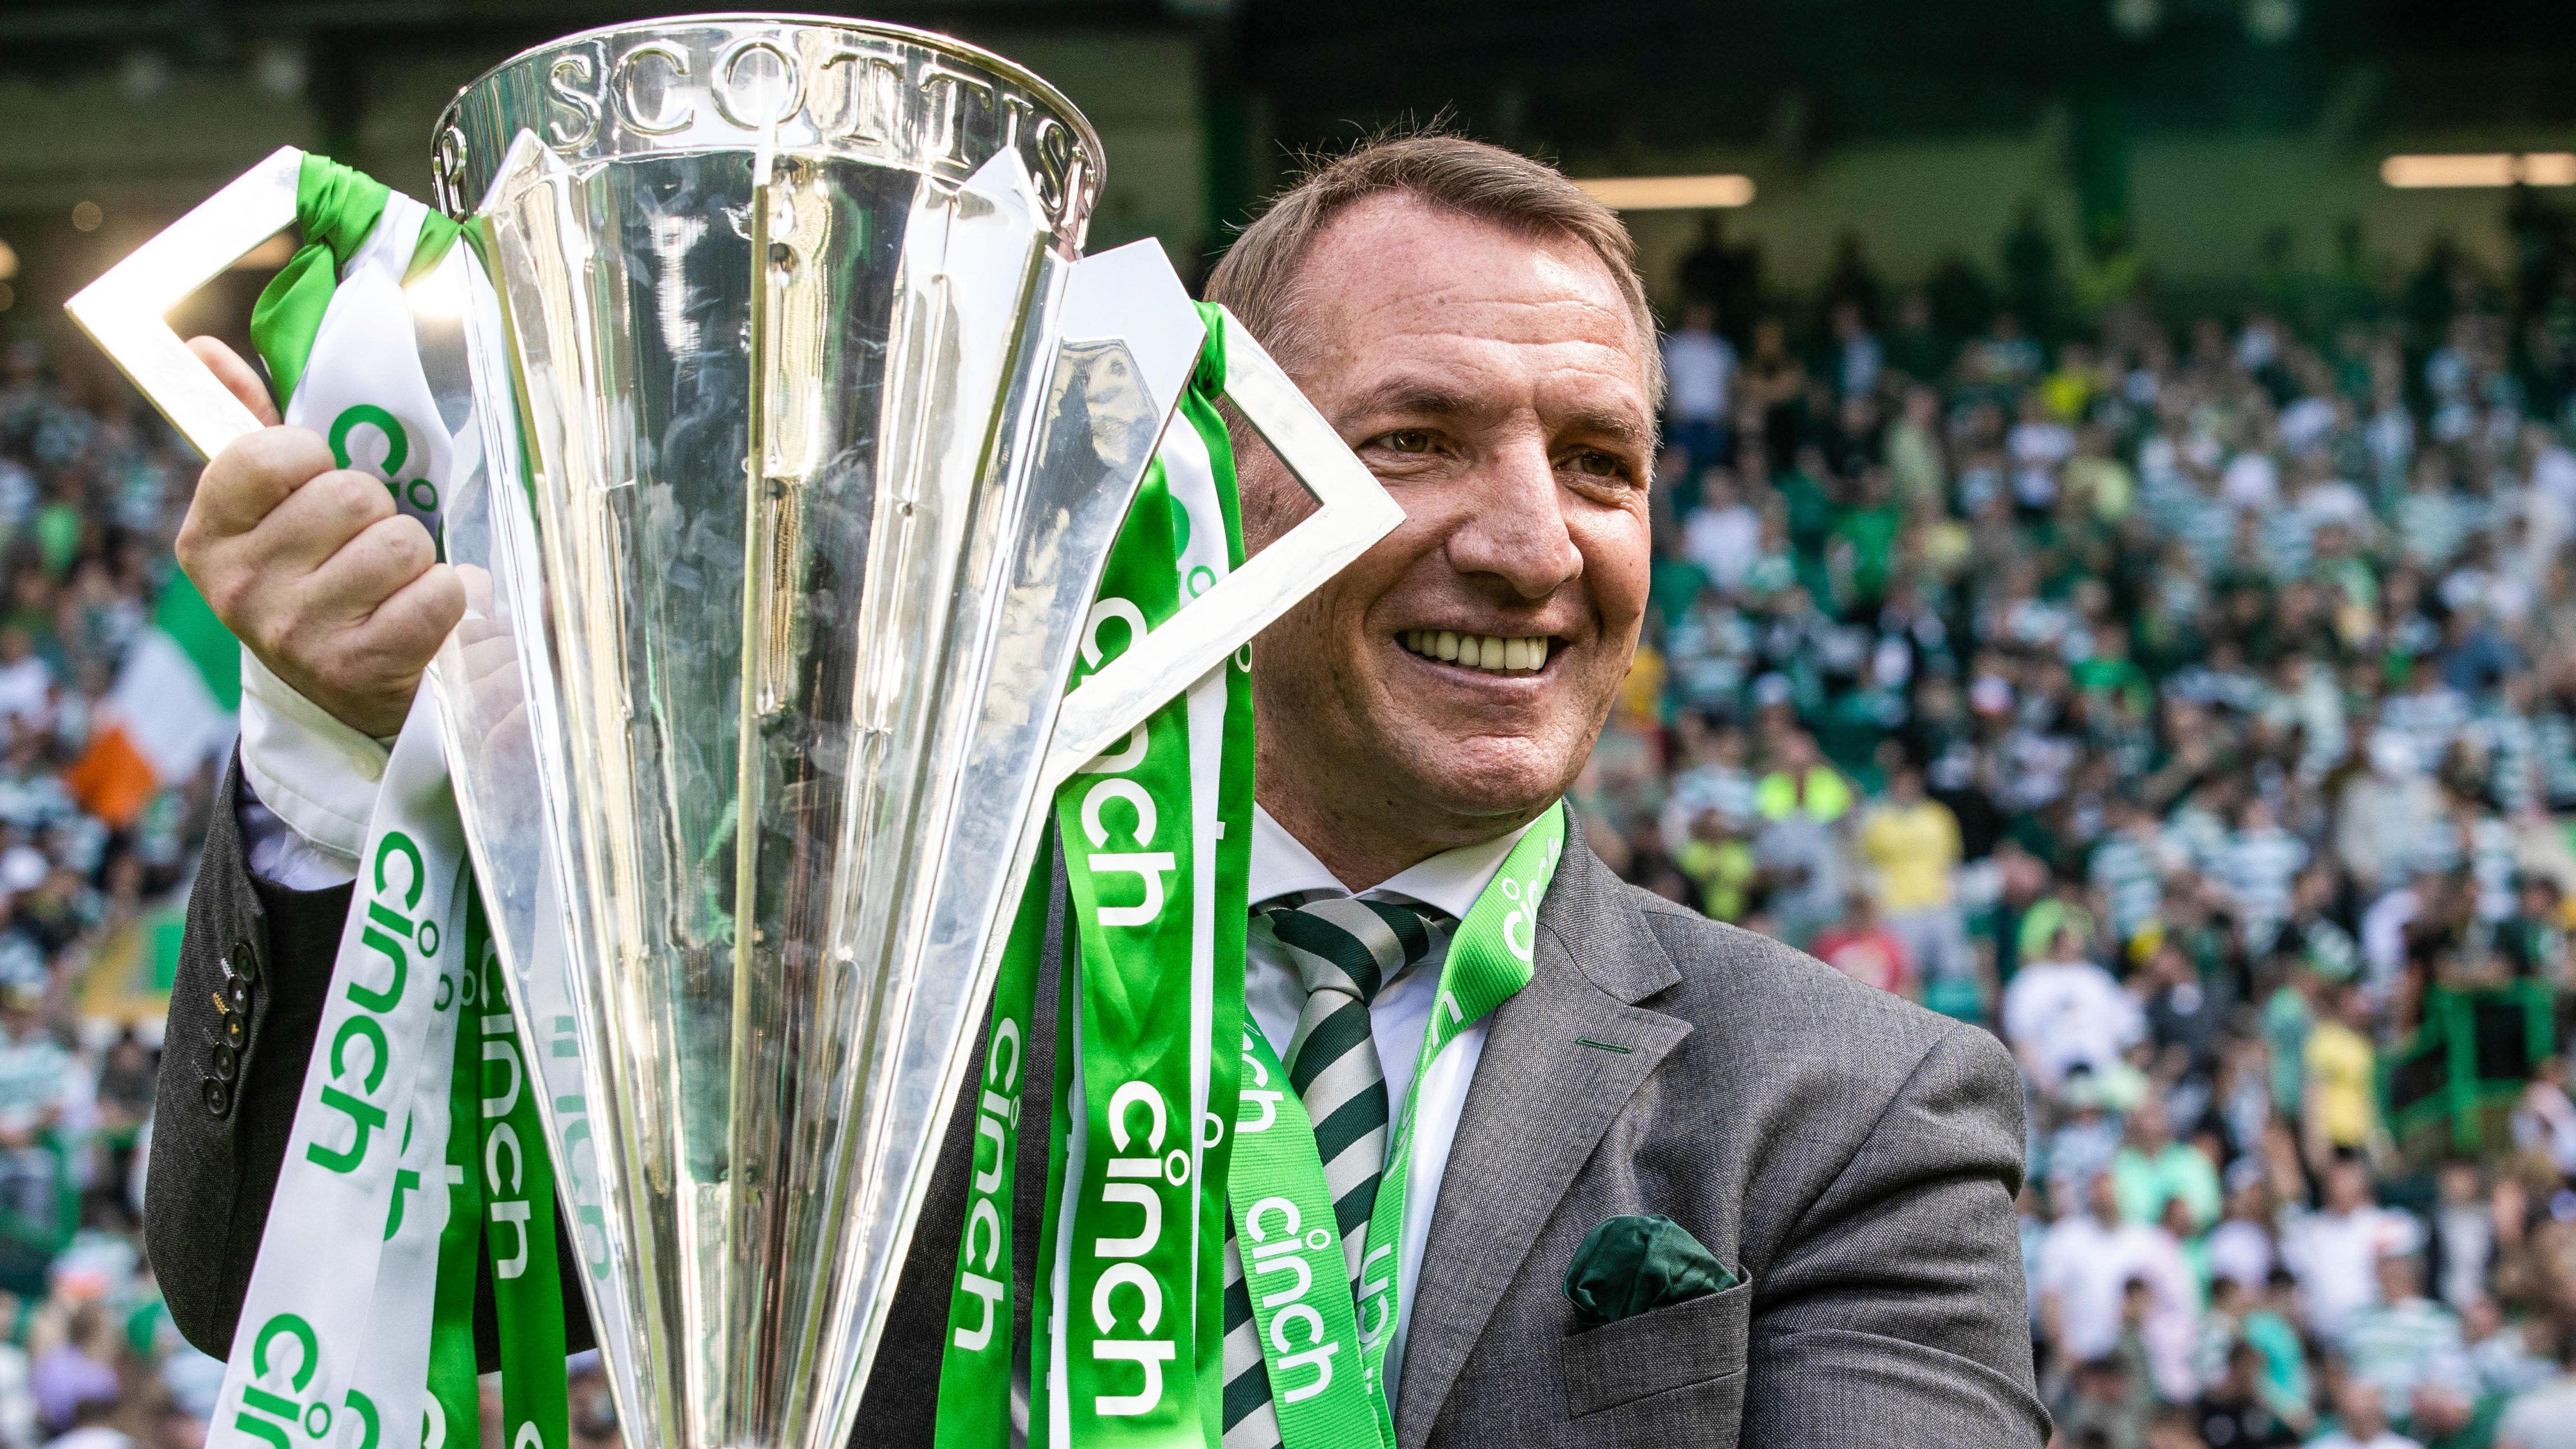 'On fire' Celtic will 'never be arrogant' - Rodgers